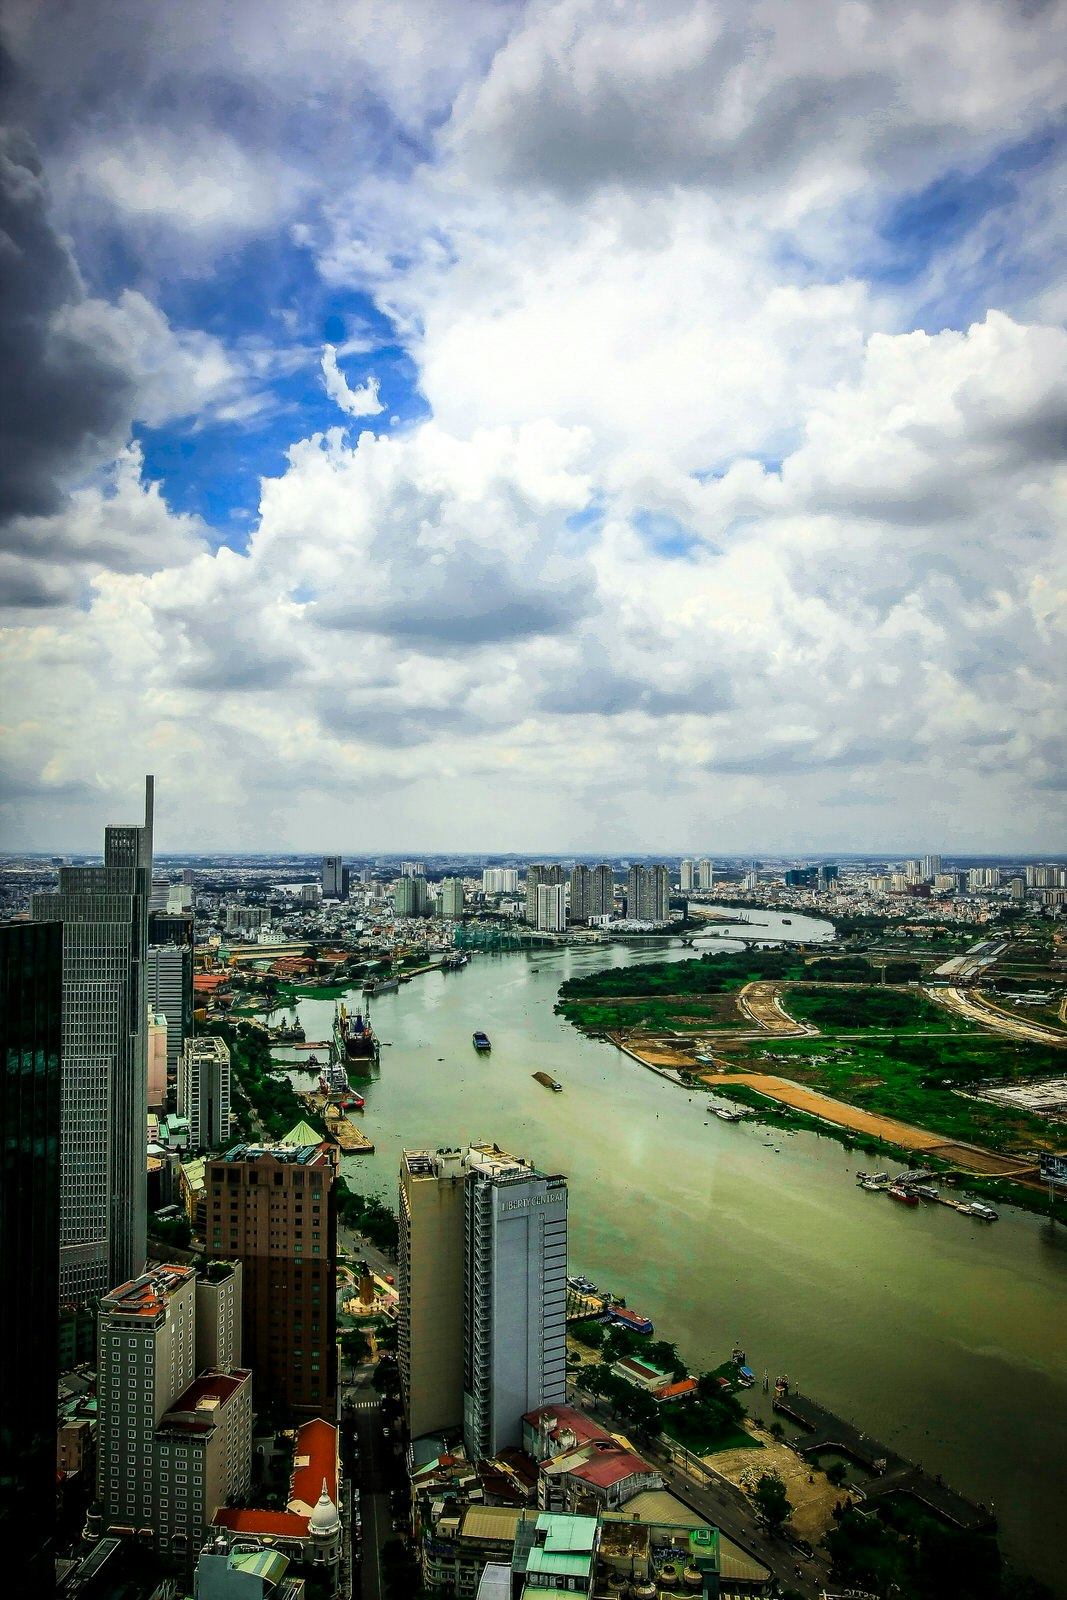 View from above of Saigon River winding through Ho Chi Minh City